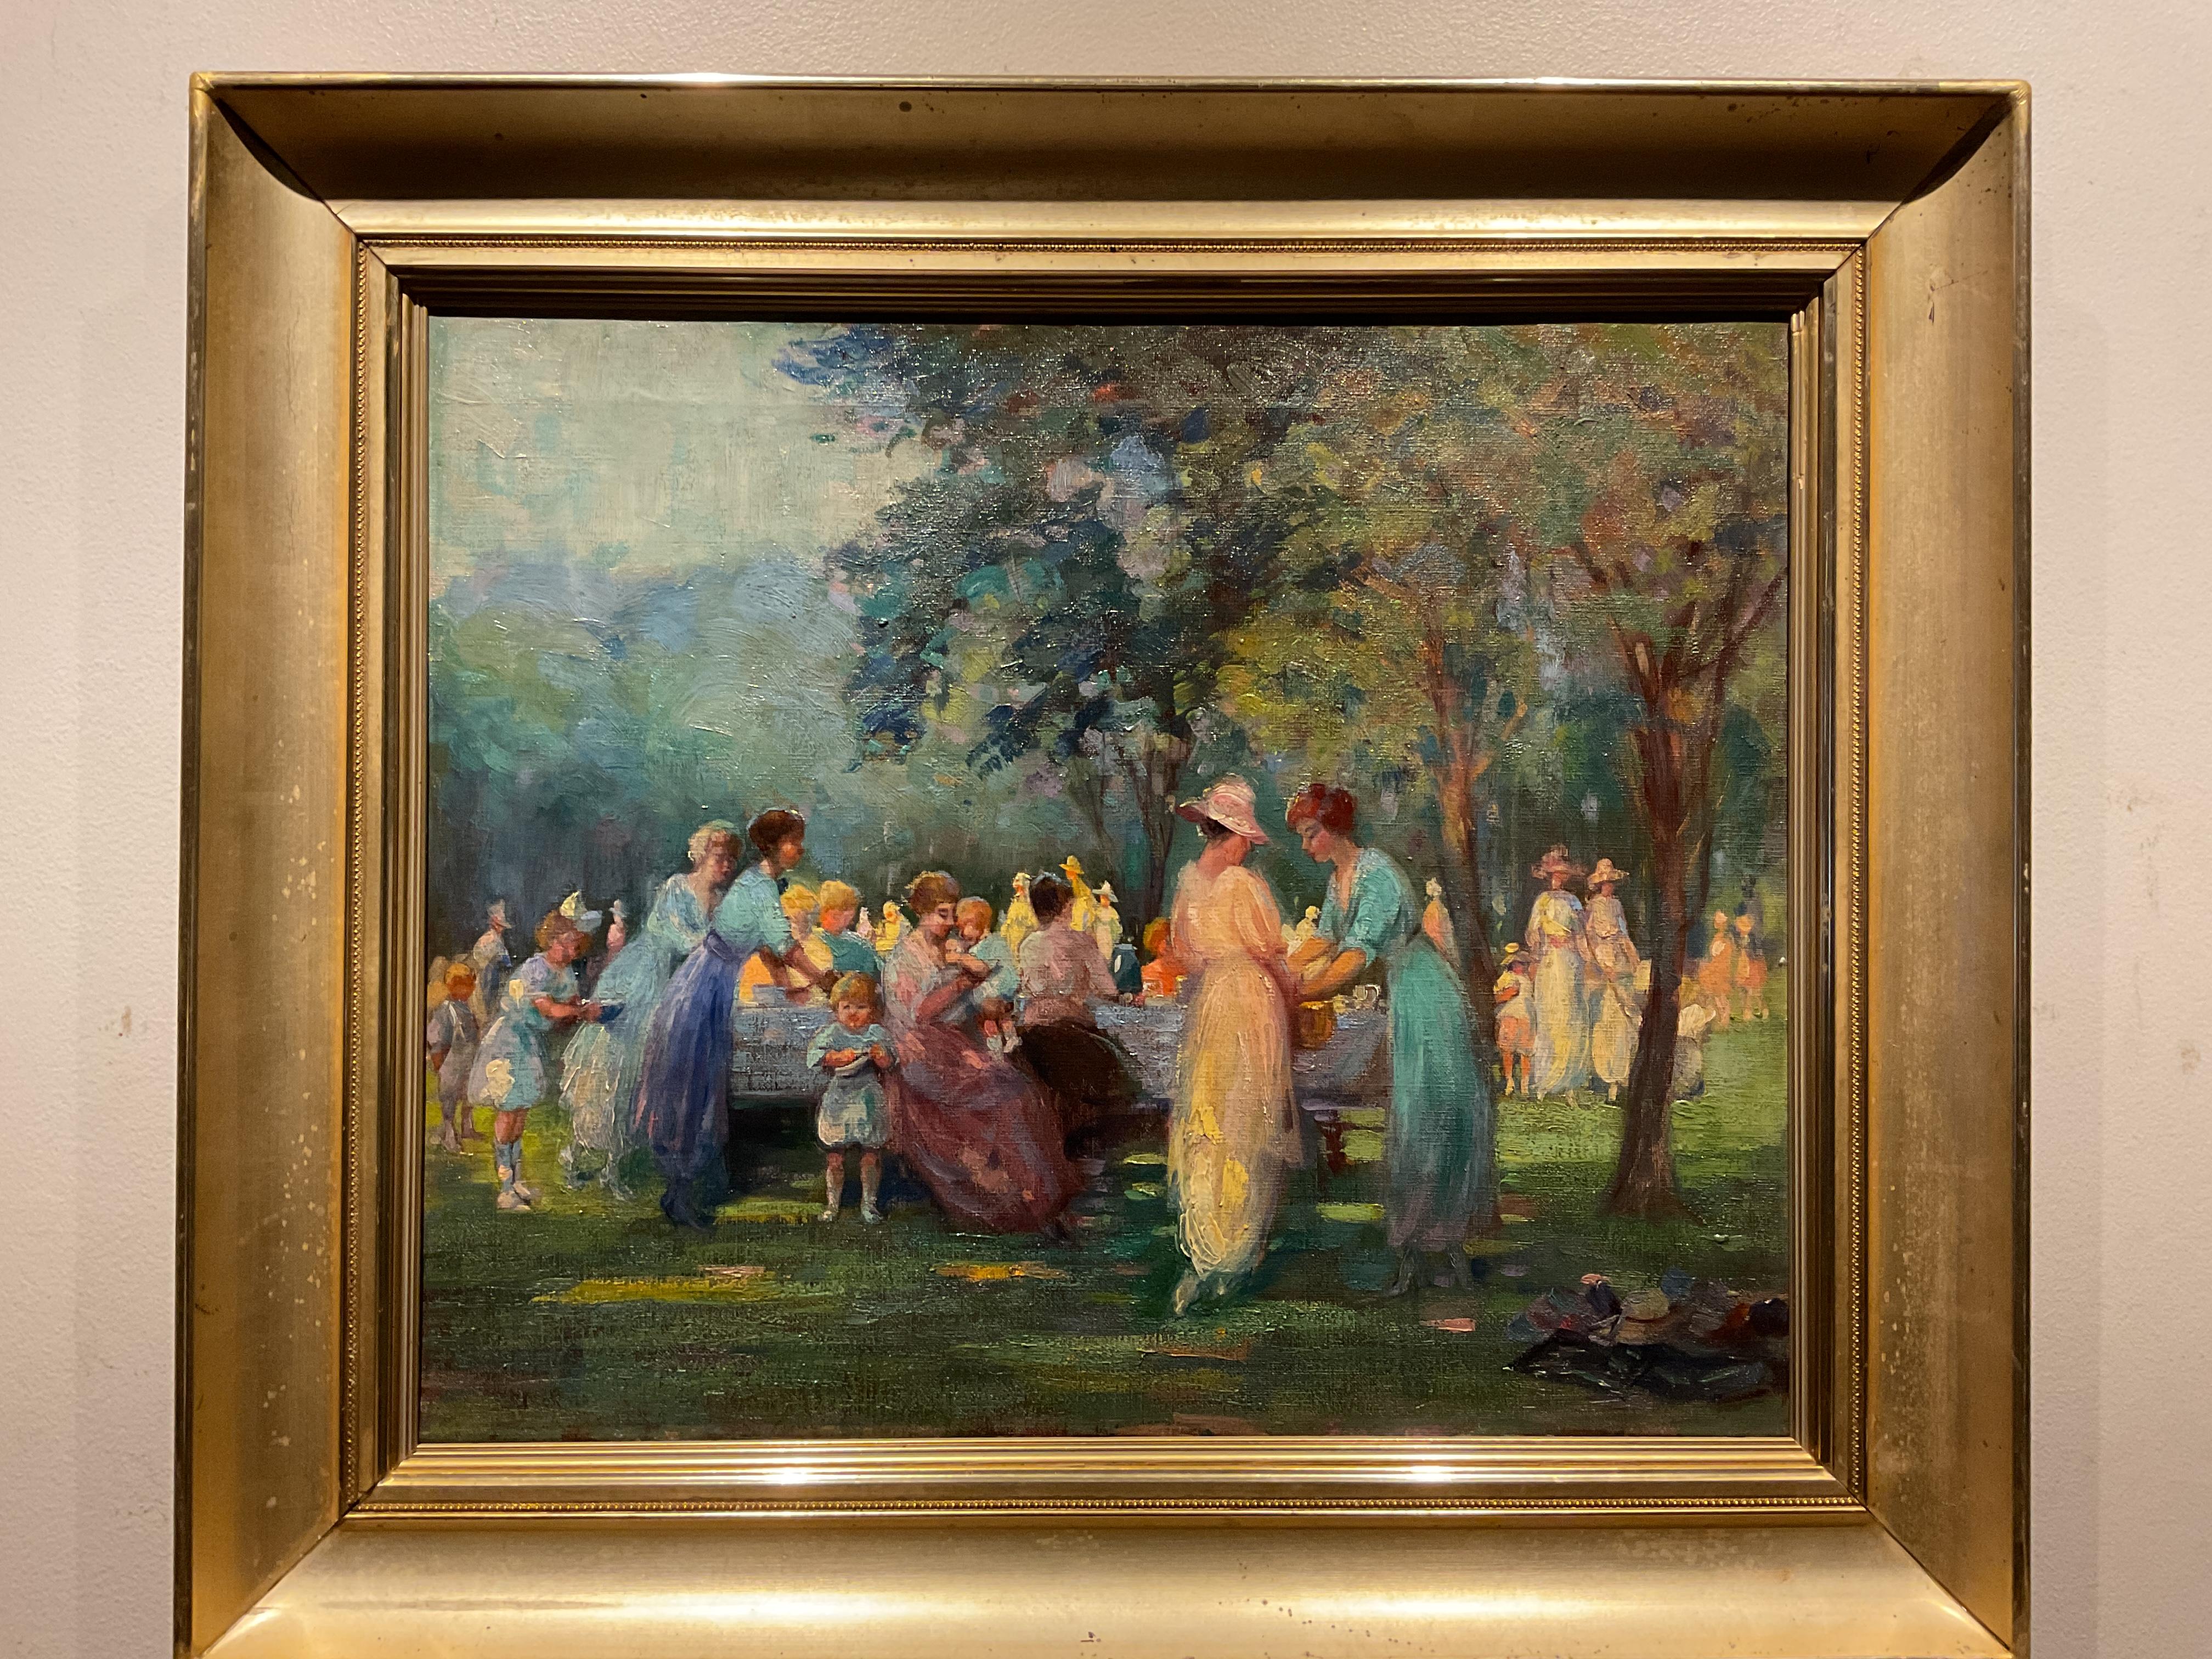 Unknown Figurative Painting - Fine Impressionist American School Oil on Canvas; Family Picnic or Outing, 1925